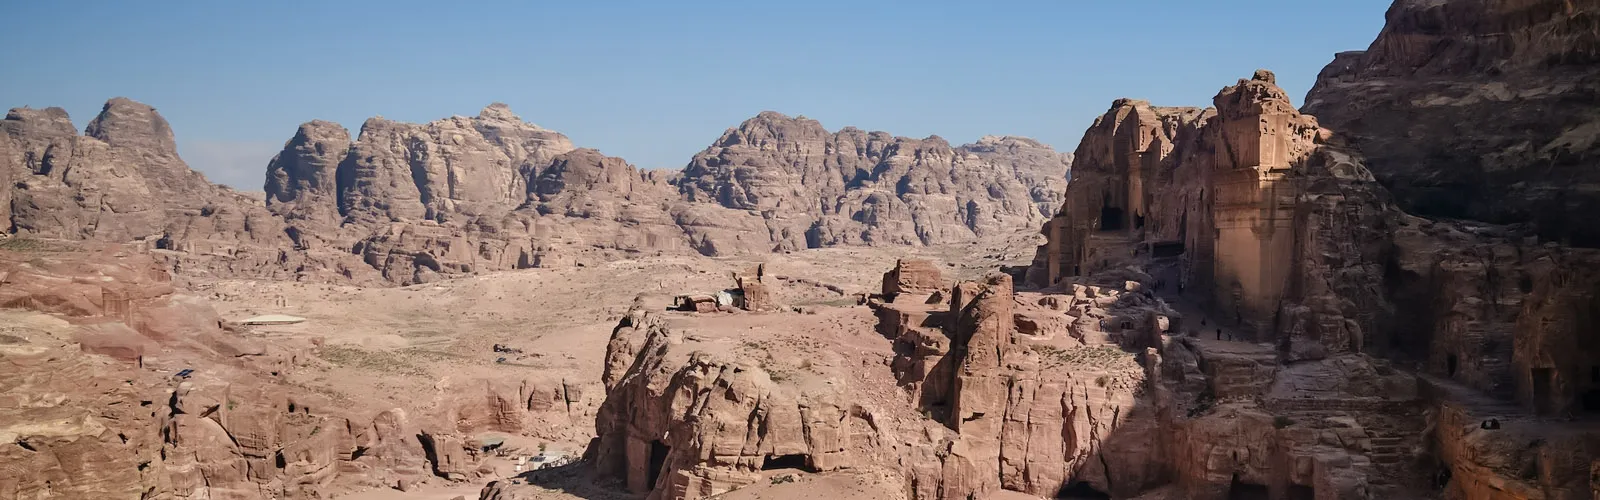 Things to Do in Petra,Bab As-Siq,Best Time to Visit Petra,How to Get to Petra